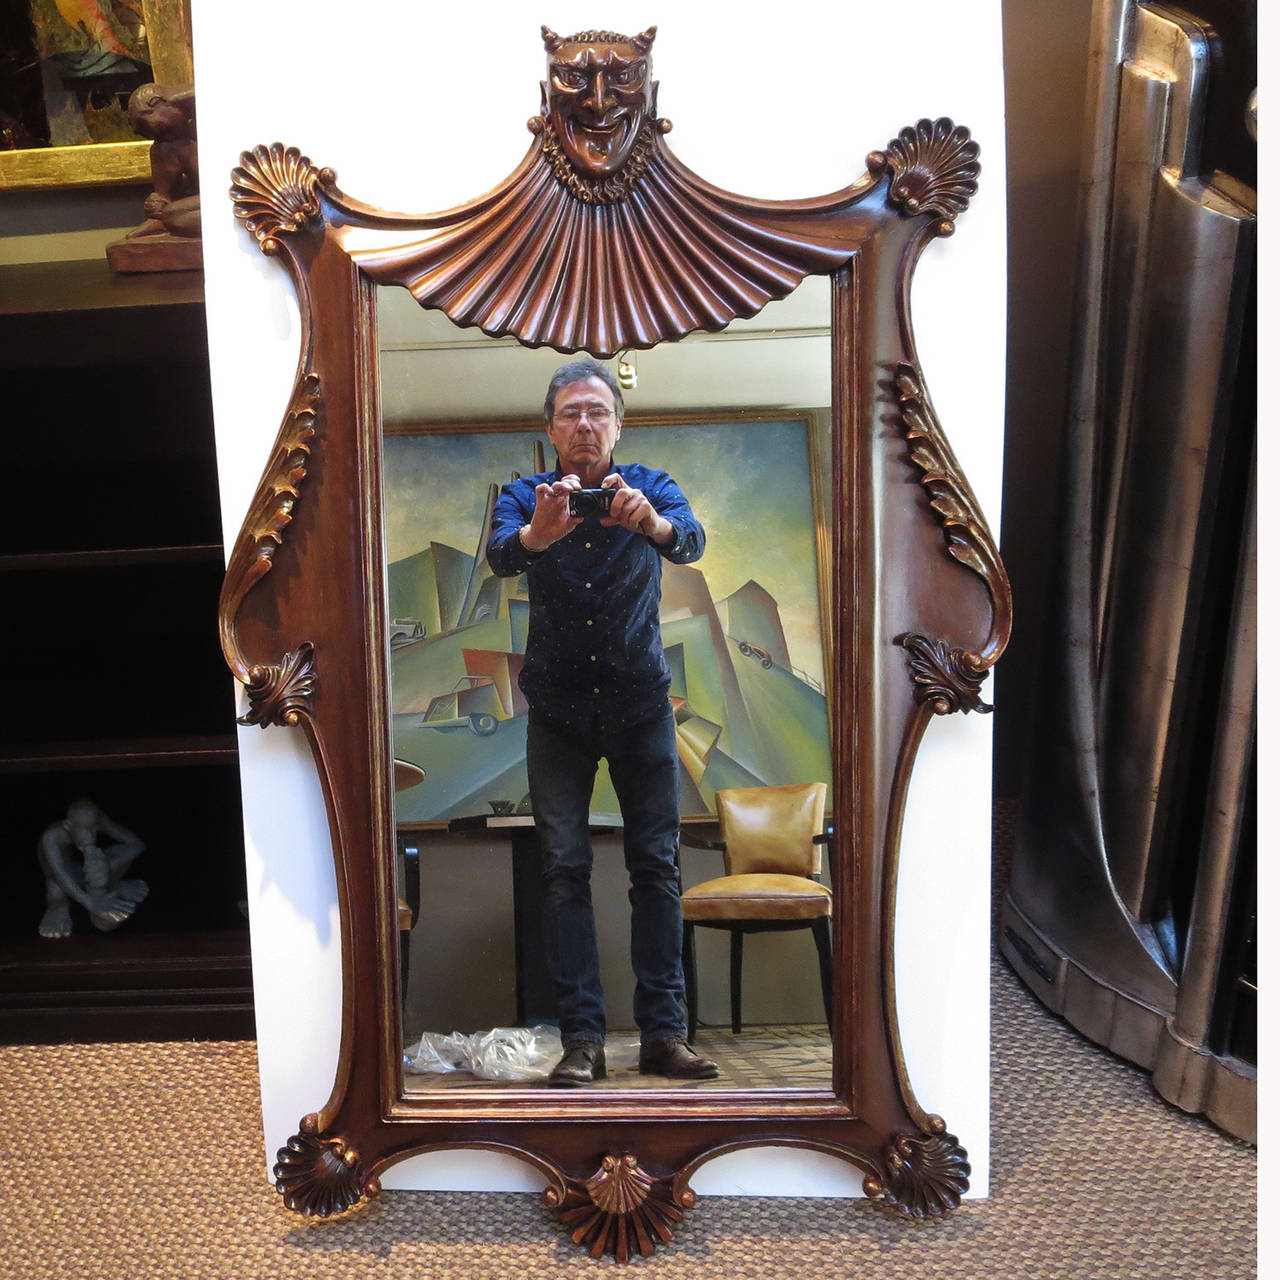 A wonderfully charming mirror in carved and finished mahogany, this devilish fellow will add spice to any décor. The carving is of the highest quality, and in fantastic condition. The mirror is clean and nice, as well. The back side shows quite a